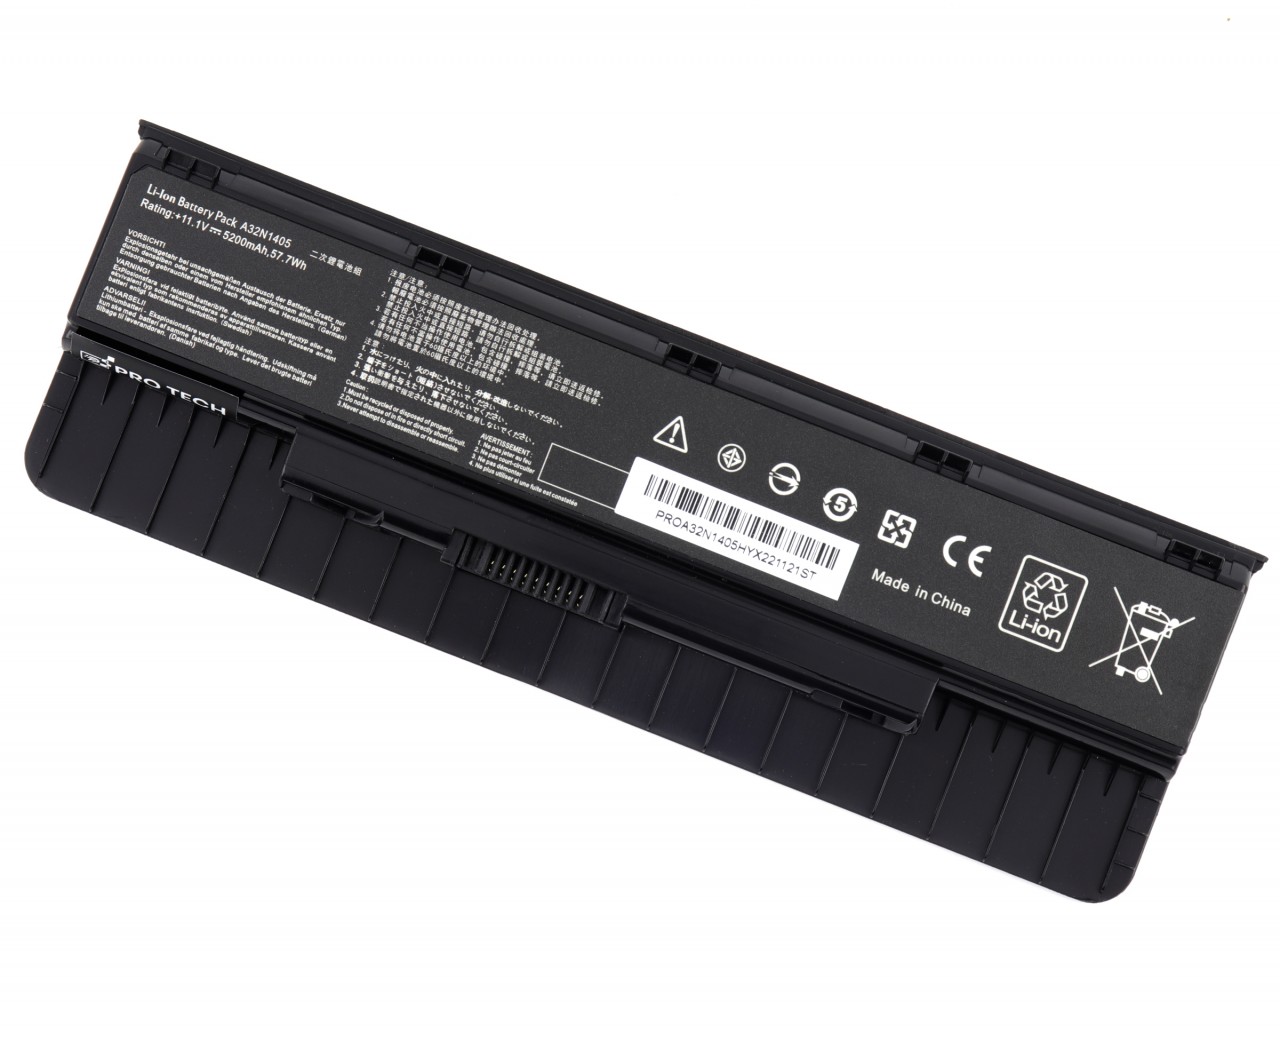 Baterie Asus N76VJ-T4044H 57.7Wh / 5200mAh Protech High Quality Replacement image1